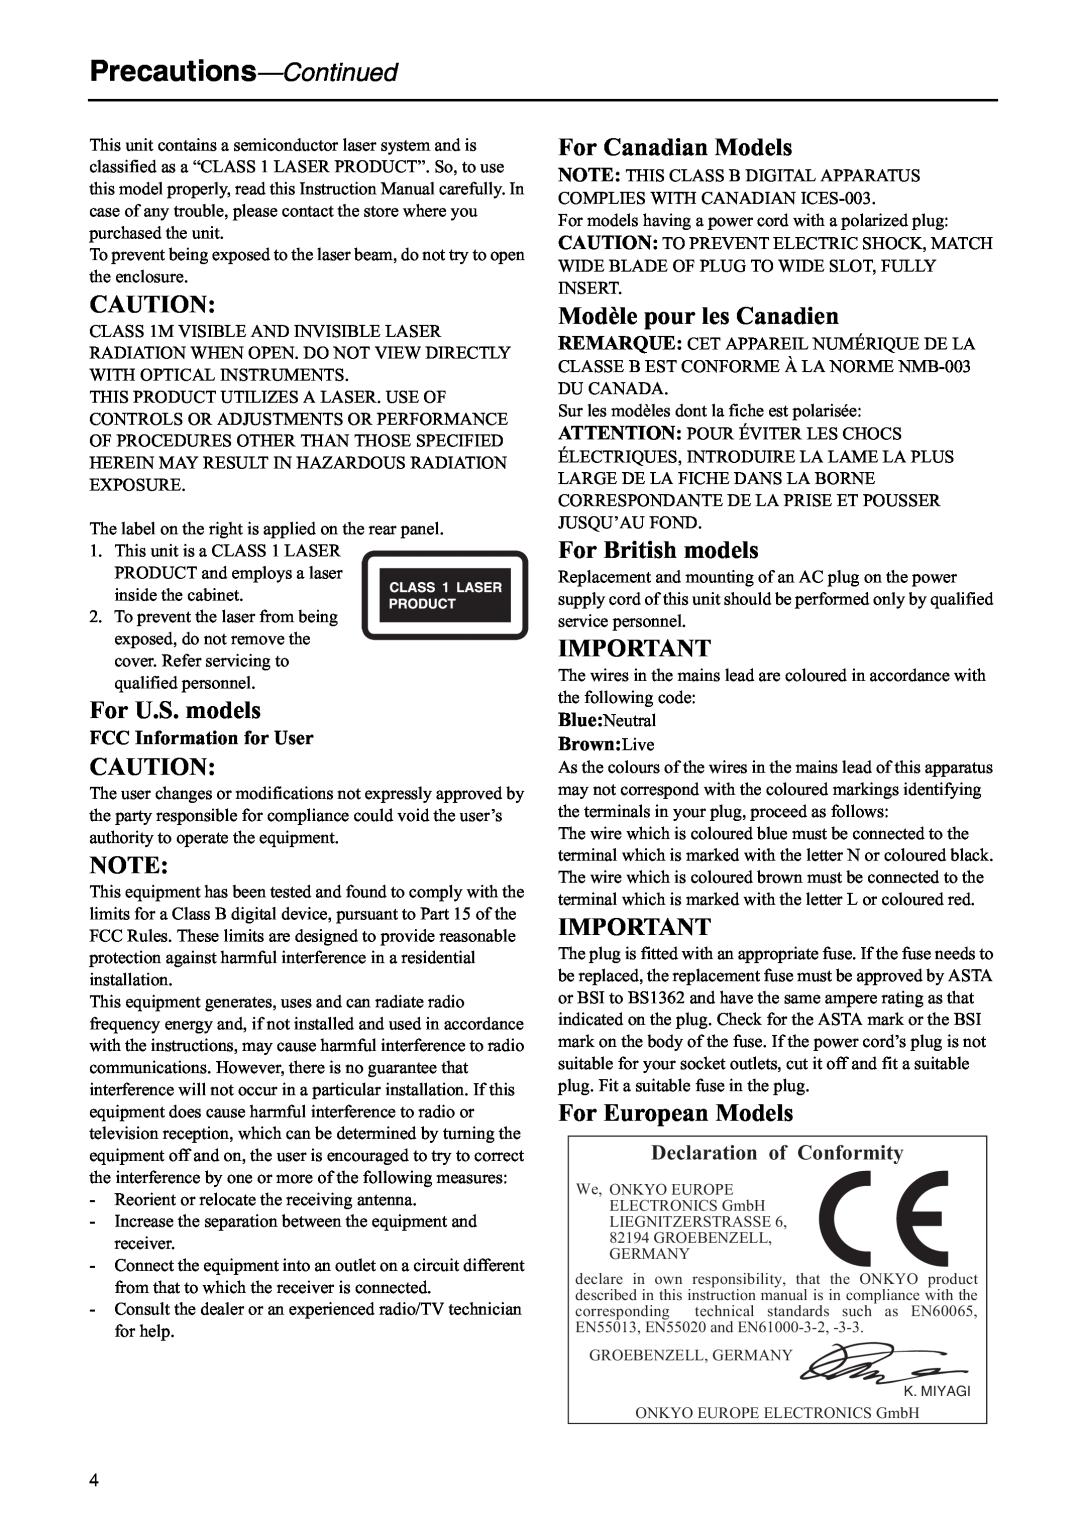 Onkyo C-S5VL Precautions-Continued, FCC Information for User, BrownLive, For U.S. models, For Canadian Models 